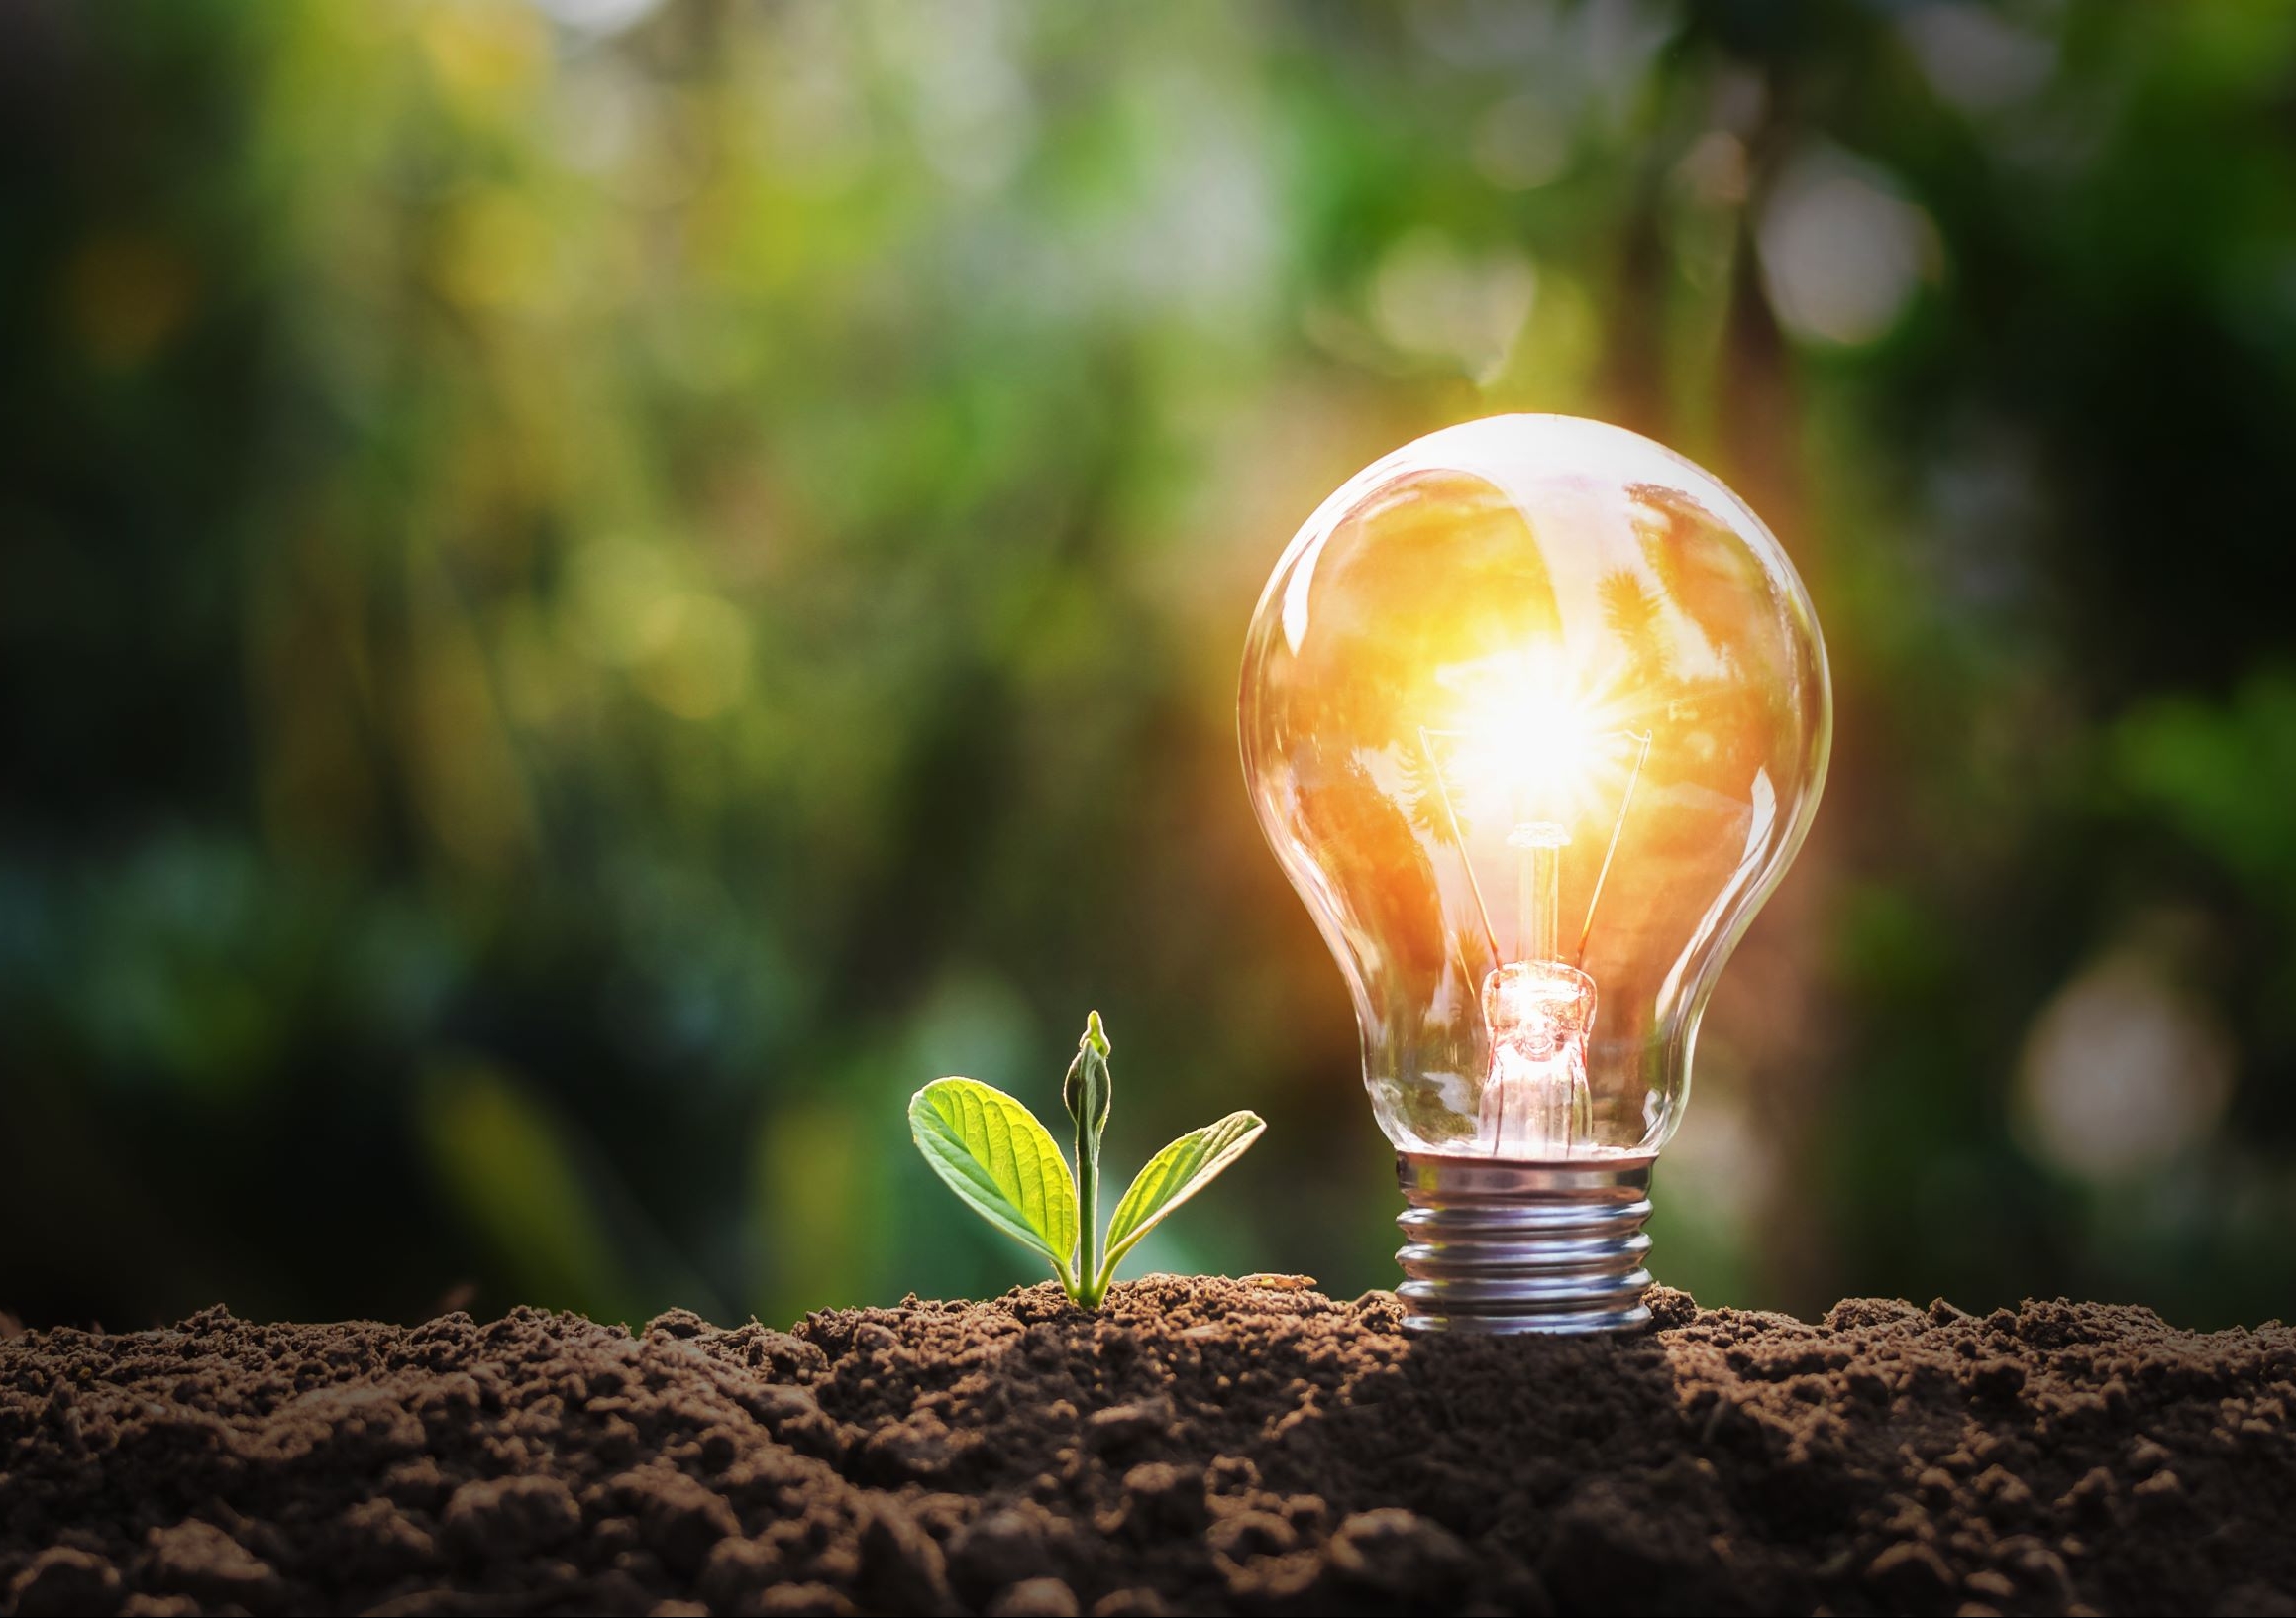 NUW Energy will explore the challenges of climate, energy and the environment to find sustainable, economic solutions for society. Image: Shutterstock